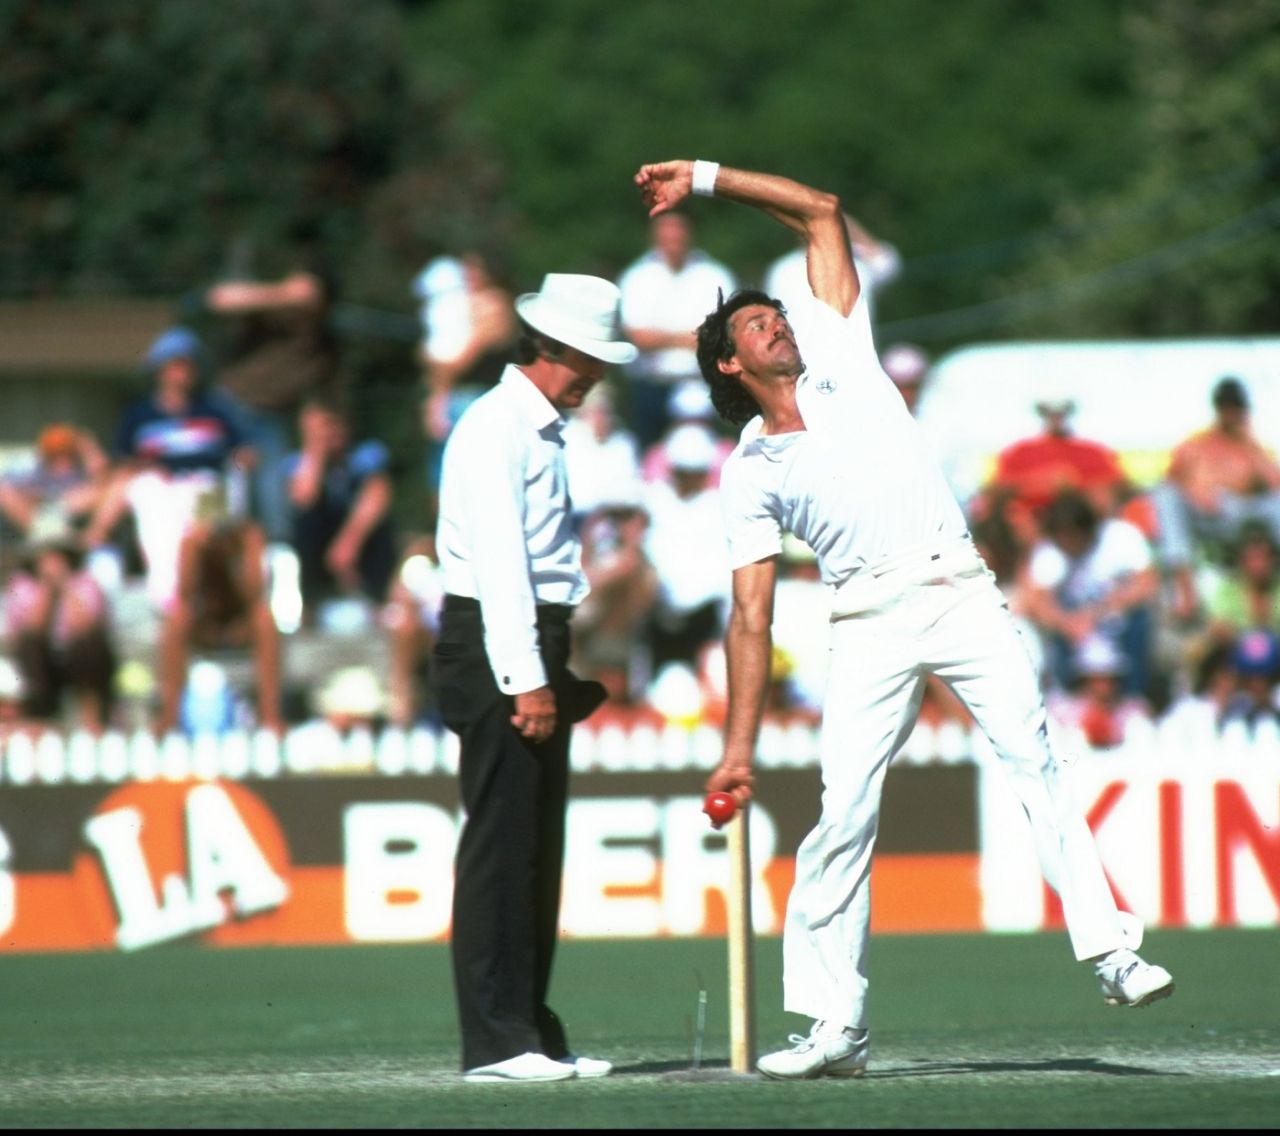 Bruce Yardley bowls during the Third Test match against England, the Ashes, Adelaide Oval, December 15, 1982, Adelaide